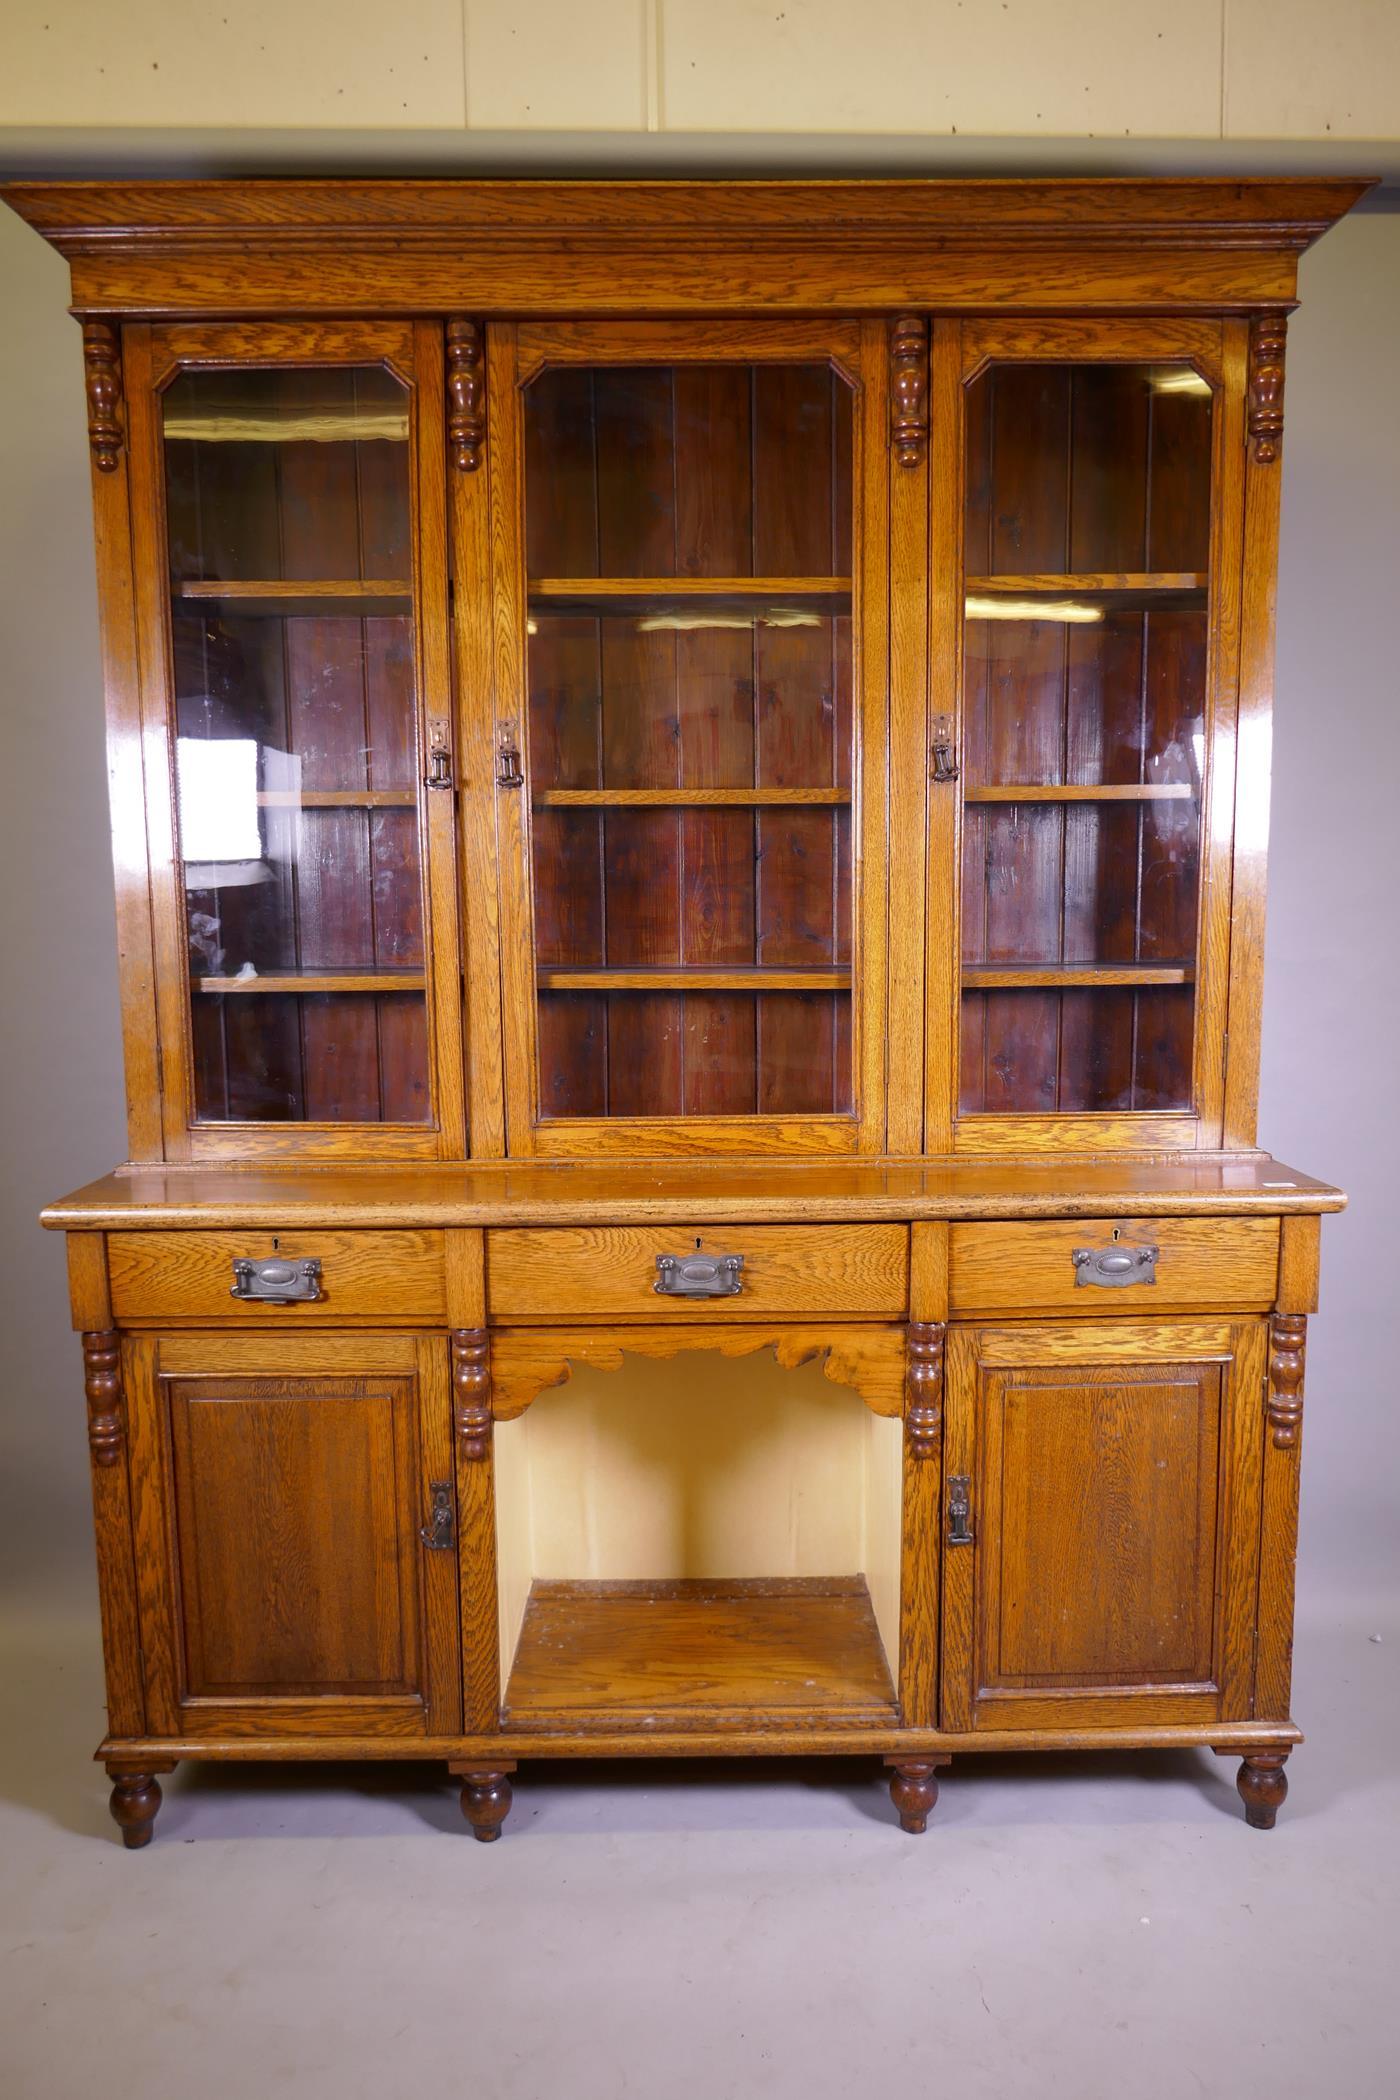 A C19th oak dresser, the upper section with three glazed doors, the base with three drawers over two